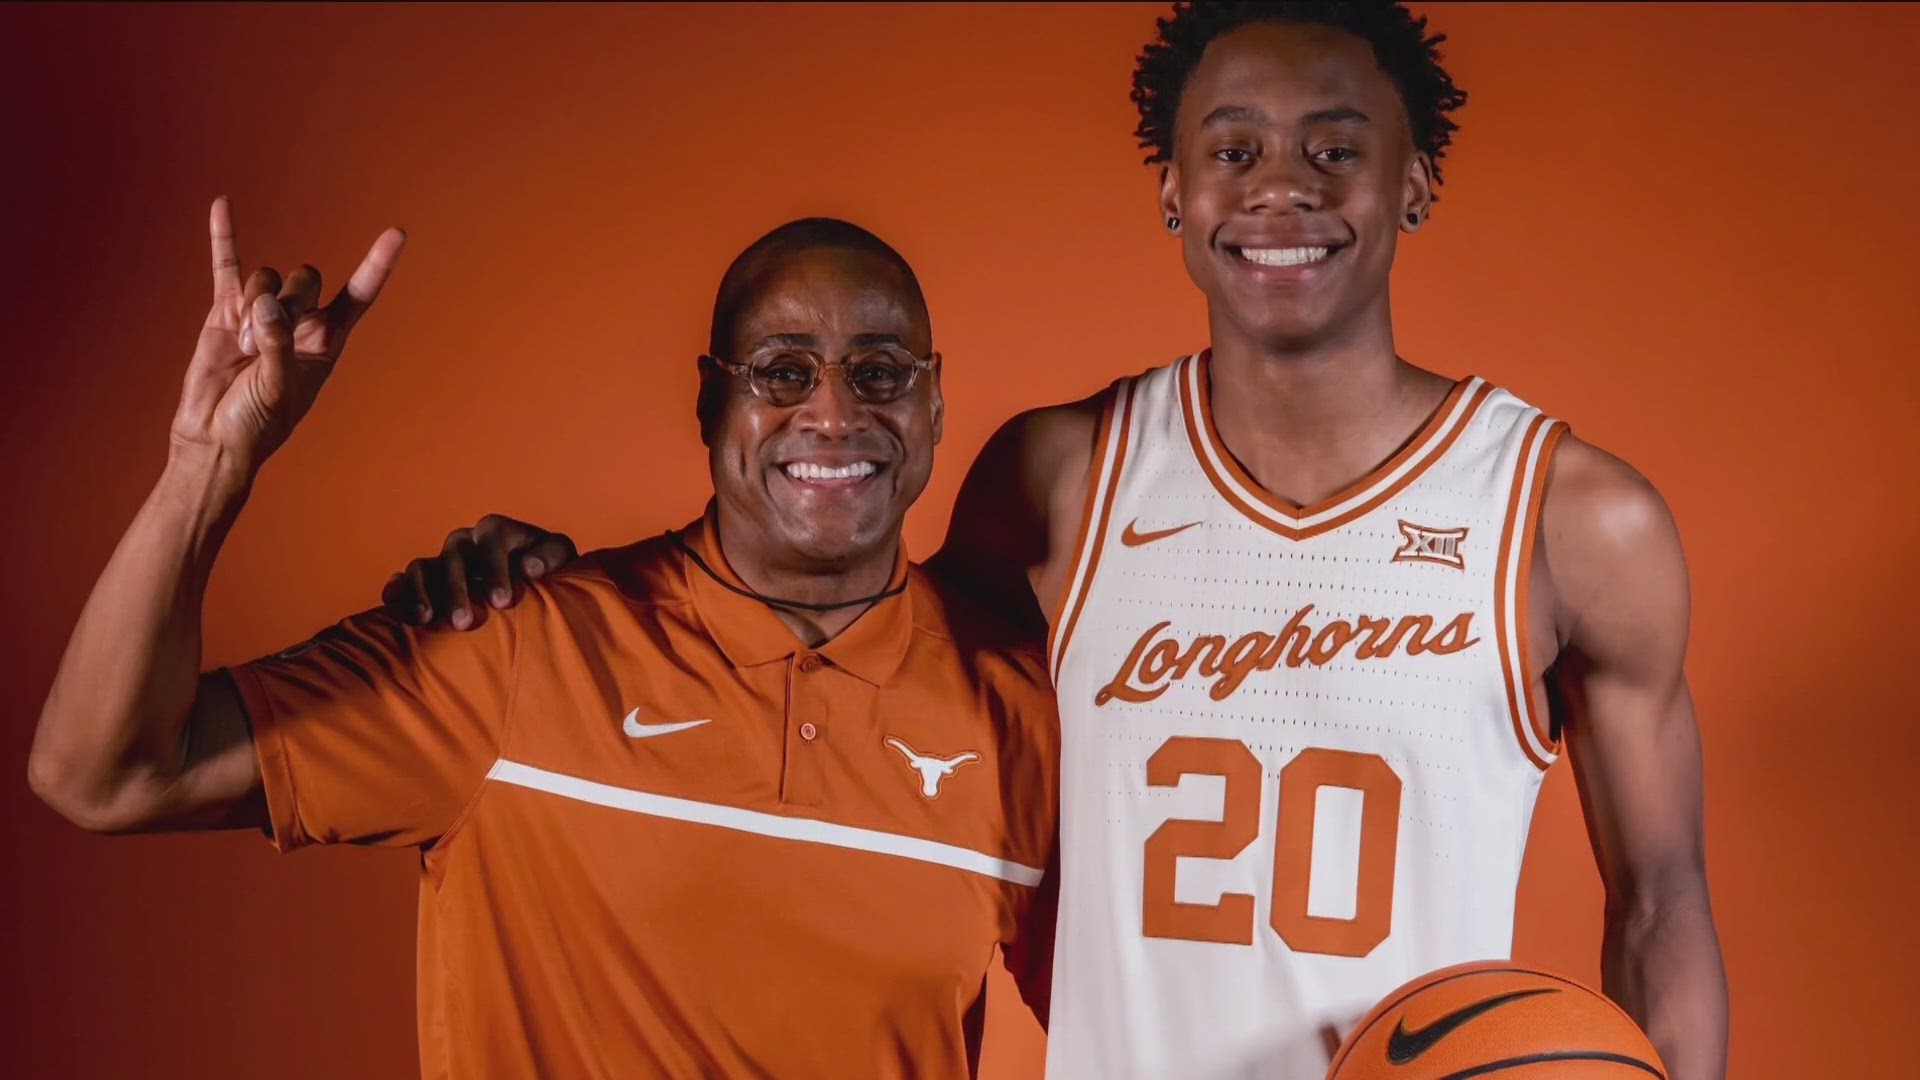 Five-star guard Tre Johnson picked Texas over Baylor on Wednesday.